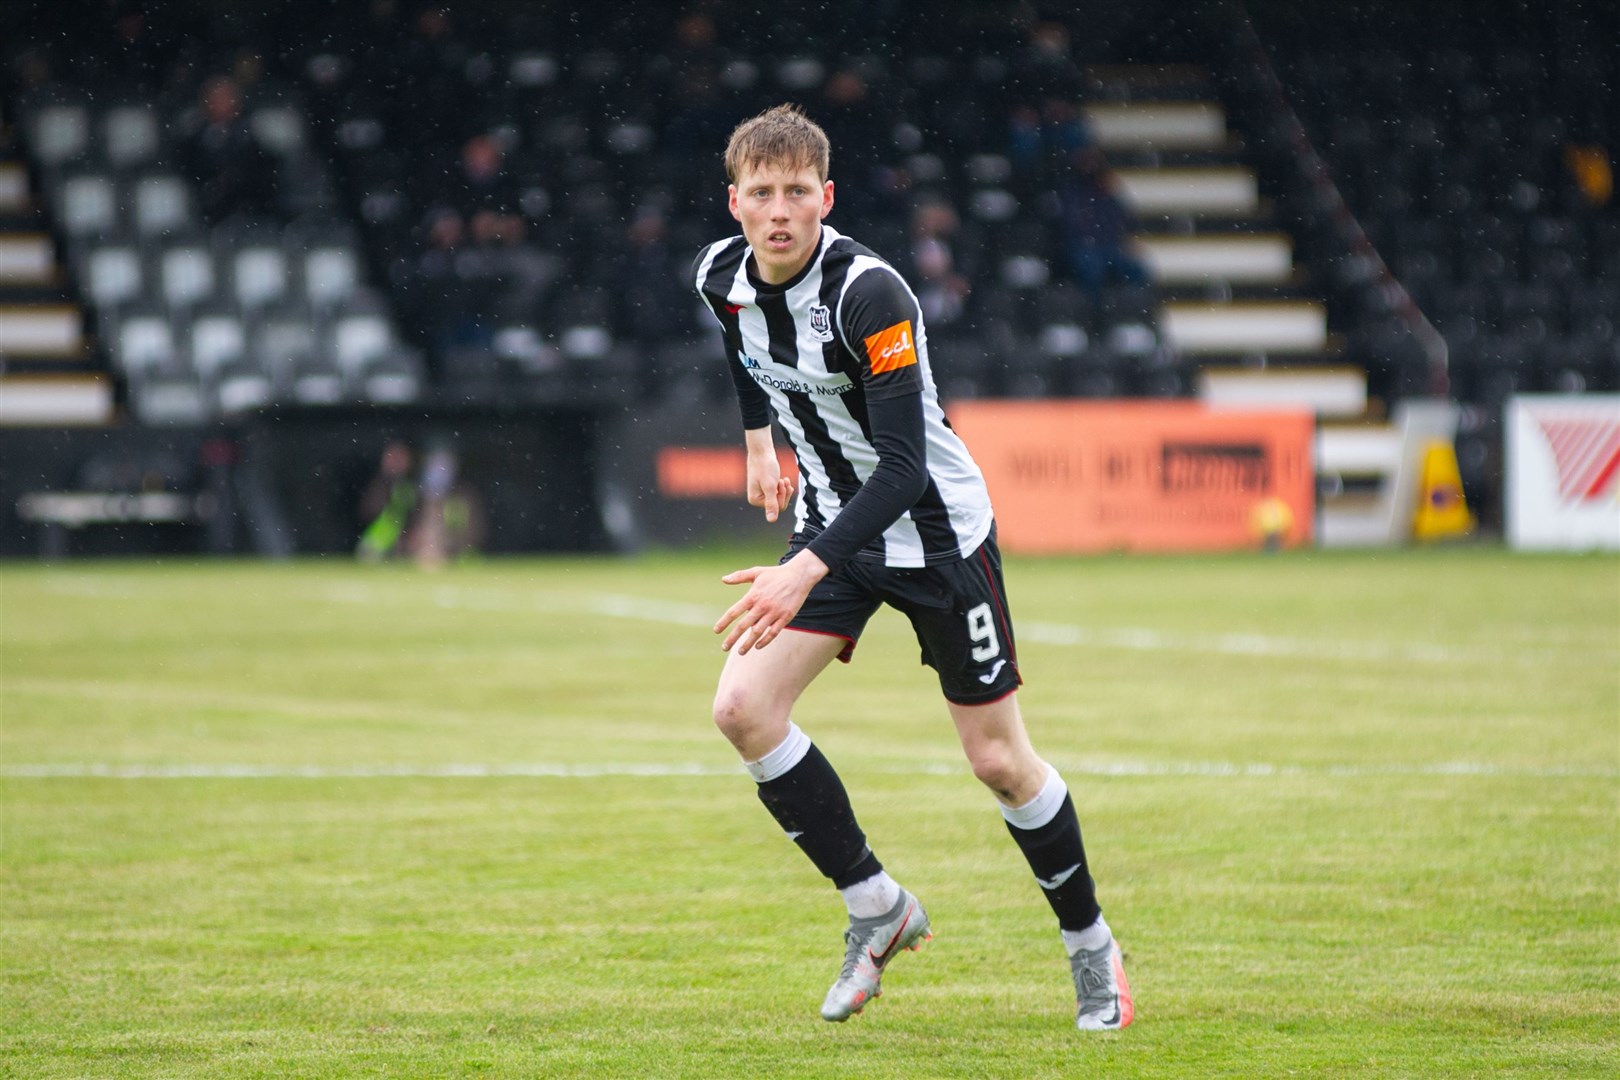 Kane Hester was on target for Elgin City in their 5-0 win at Keith. Picture: Daniel Forsyth